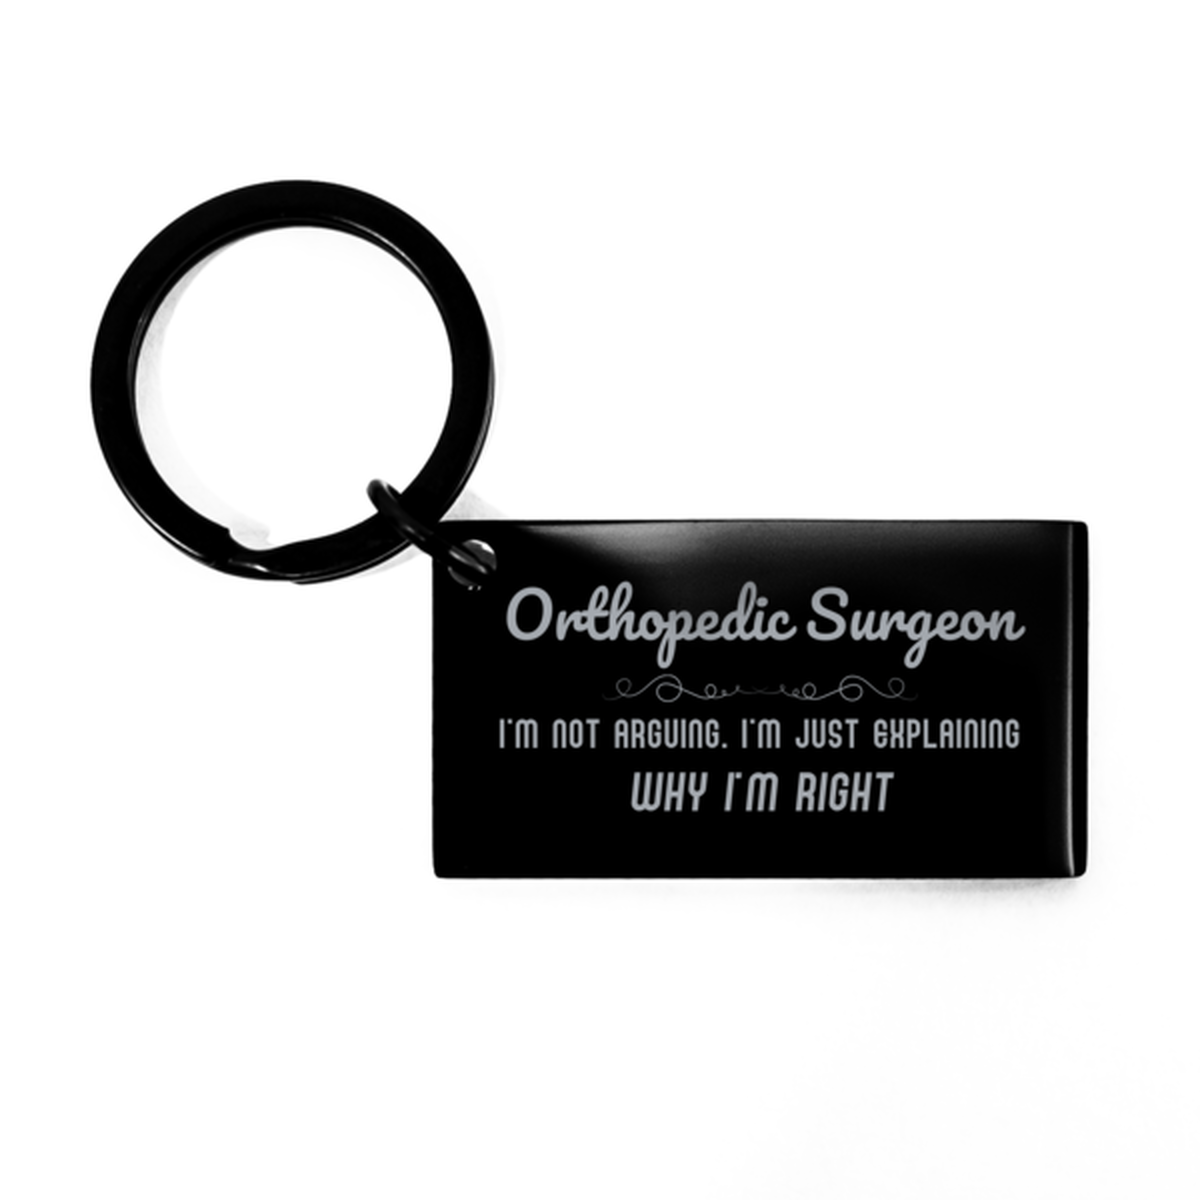 Orthopedic Surgeon I'm not Arguing. I'm Just Explaining Why I'm RIGHT Keychain, Funny Saying Quote Orthopedic Surgeon Gifts For Orthopedic Surgeon Graduation Birthday Christmas Gifts for Men Women Coworker